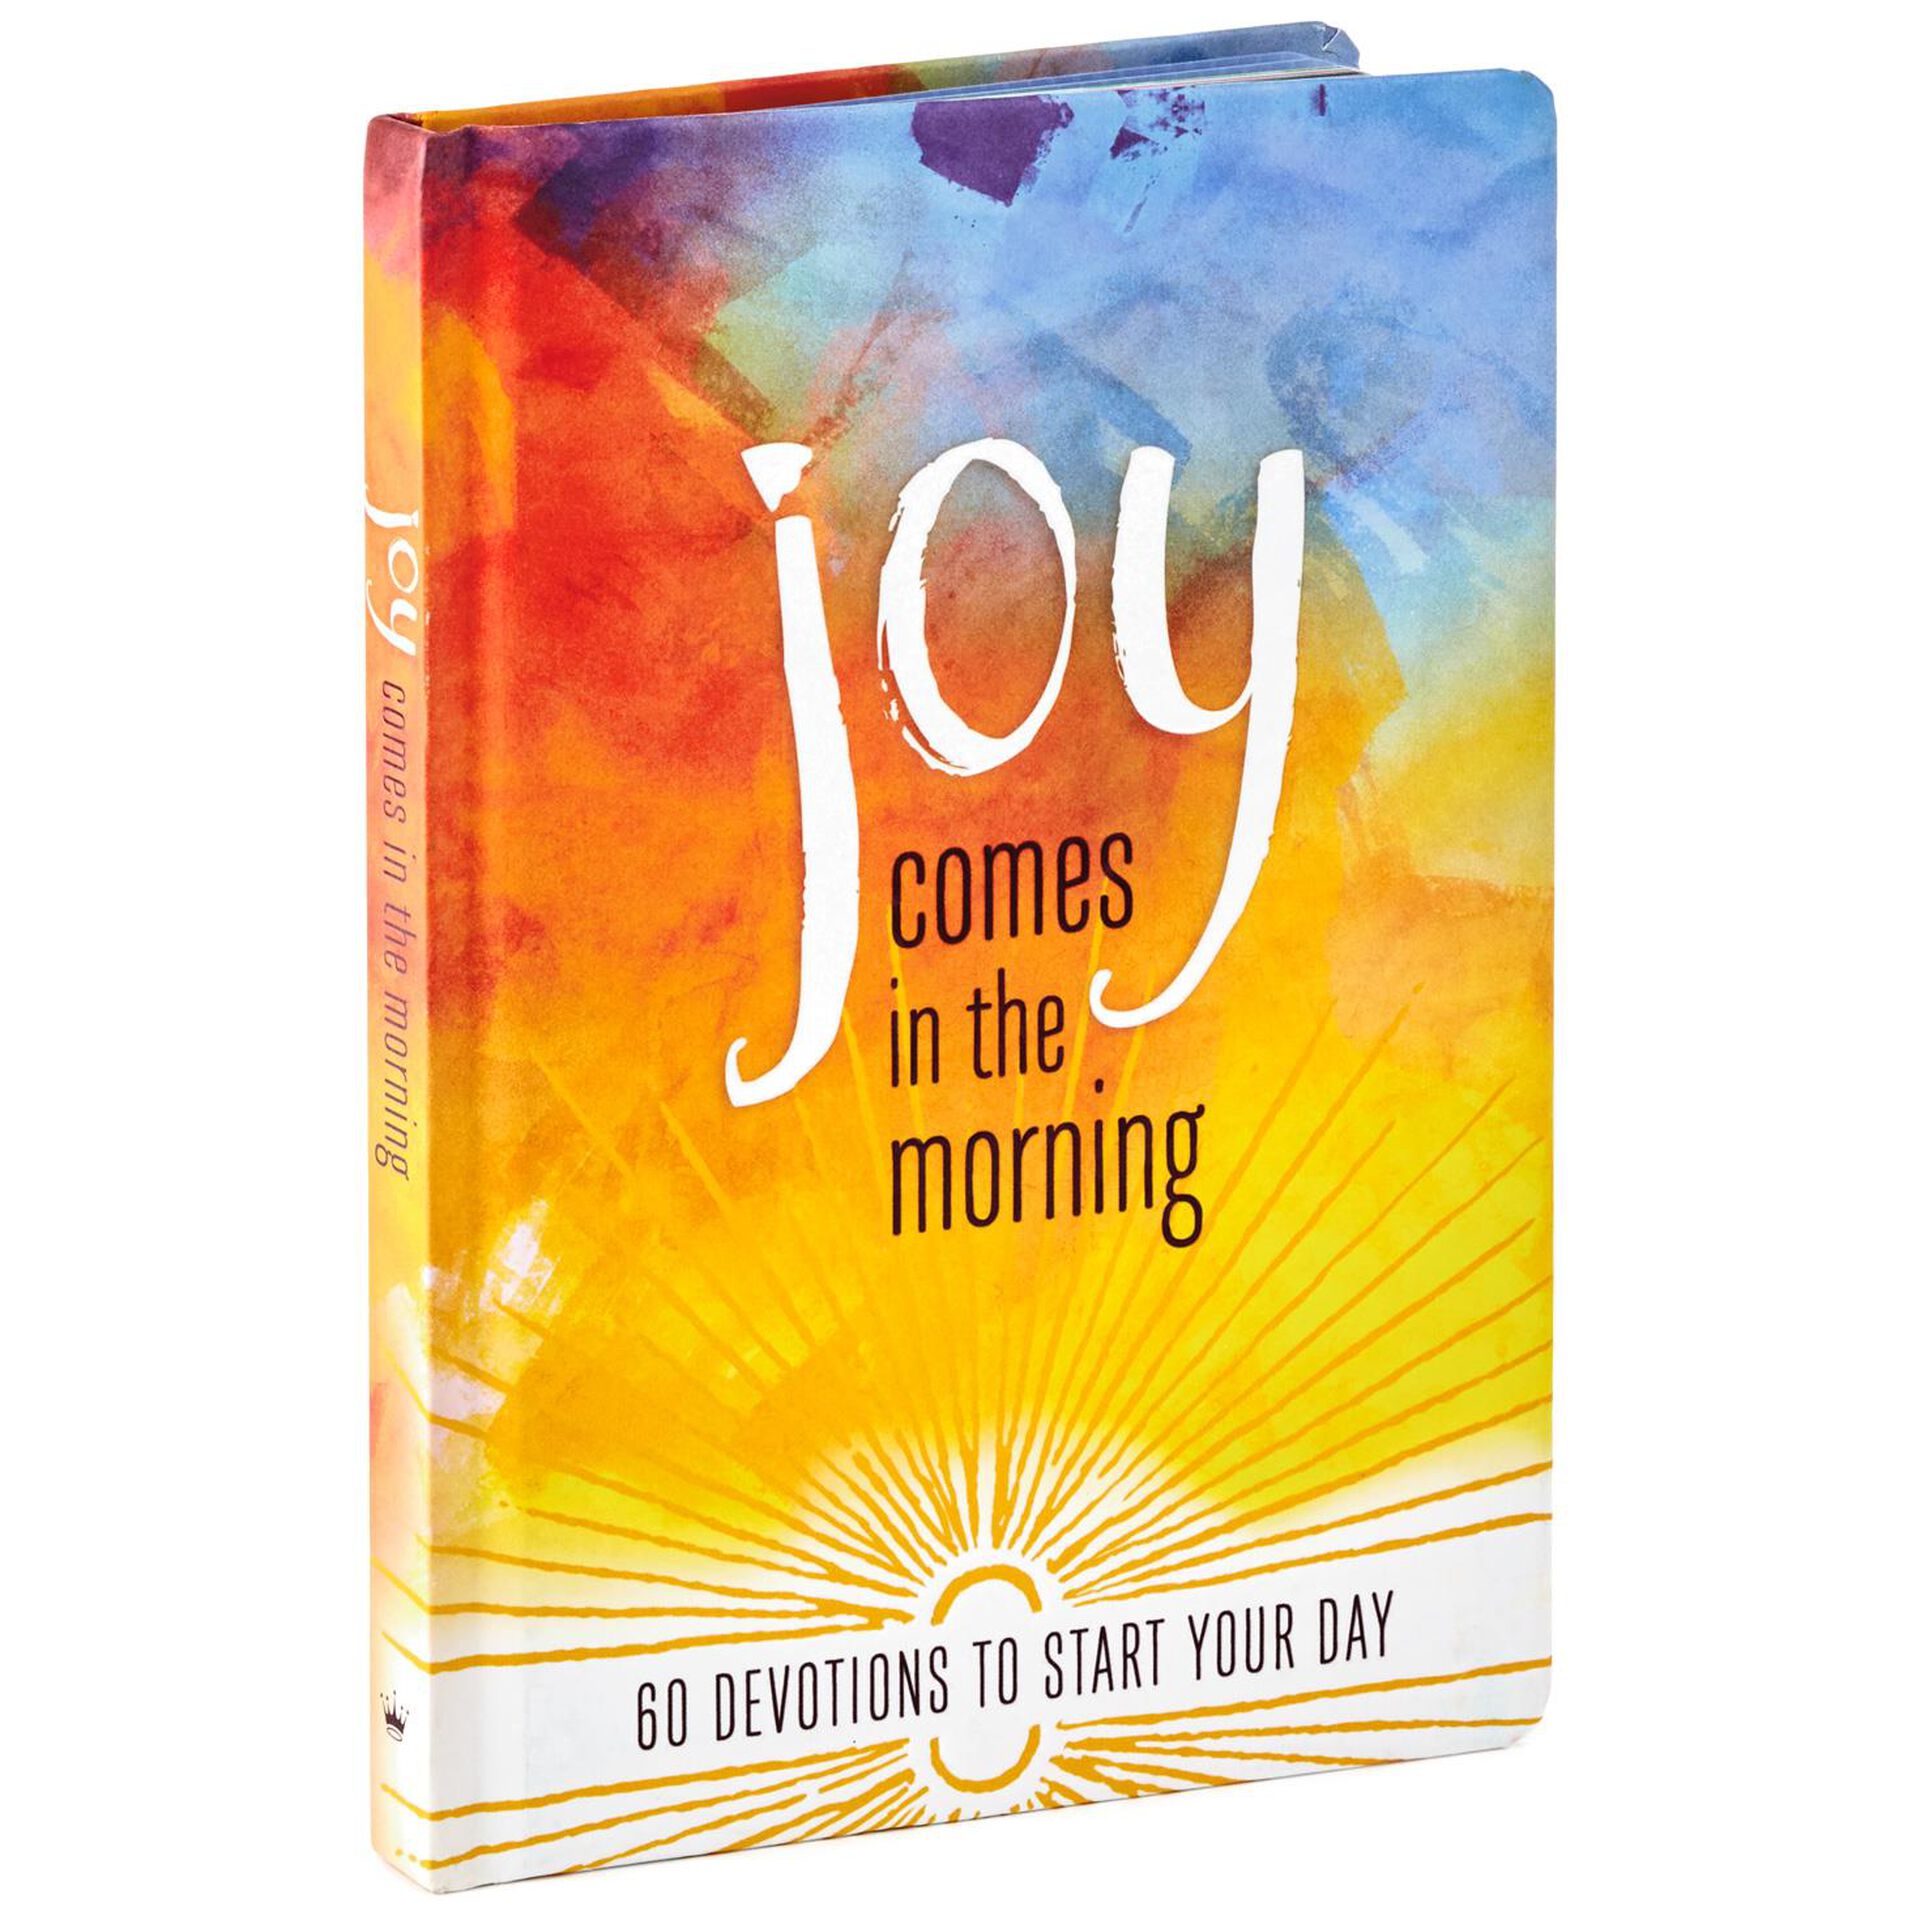 Joy-Comes-in-the-Morning-60-Devotions-to-Start-Your-Day-Book-root-1BOK1416_BOK1416_1470_1.jpg_Source_Image.jpg